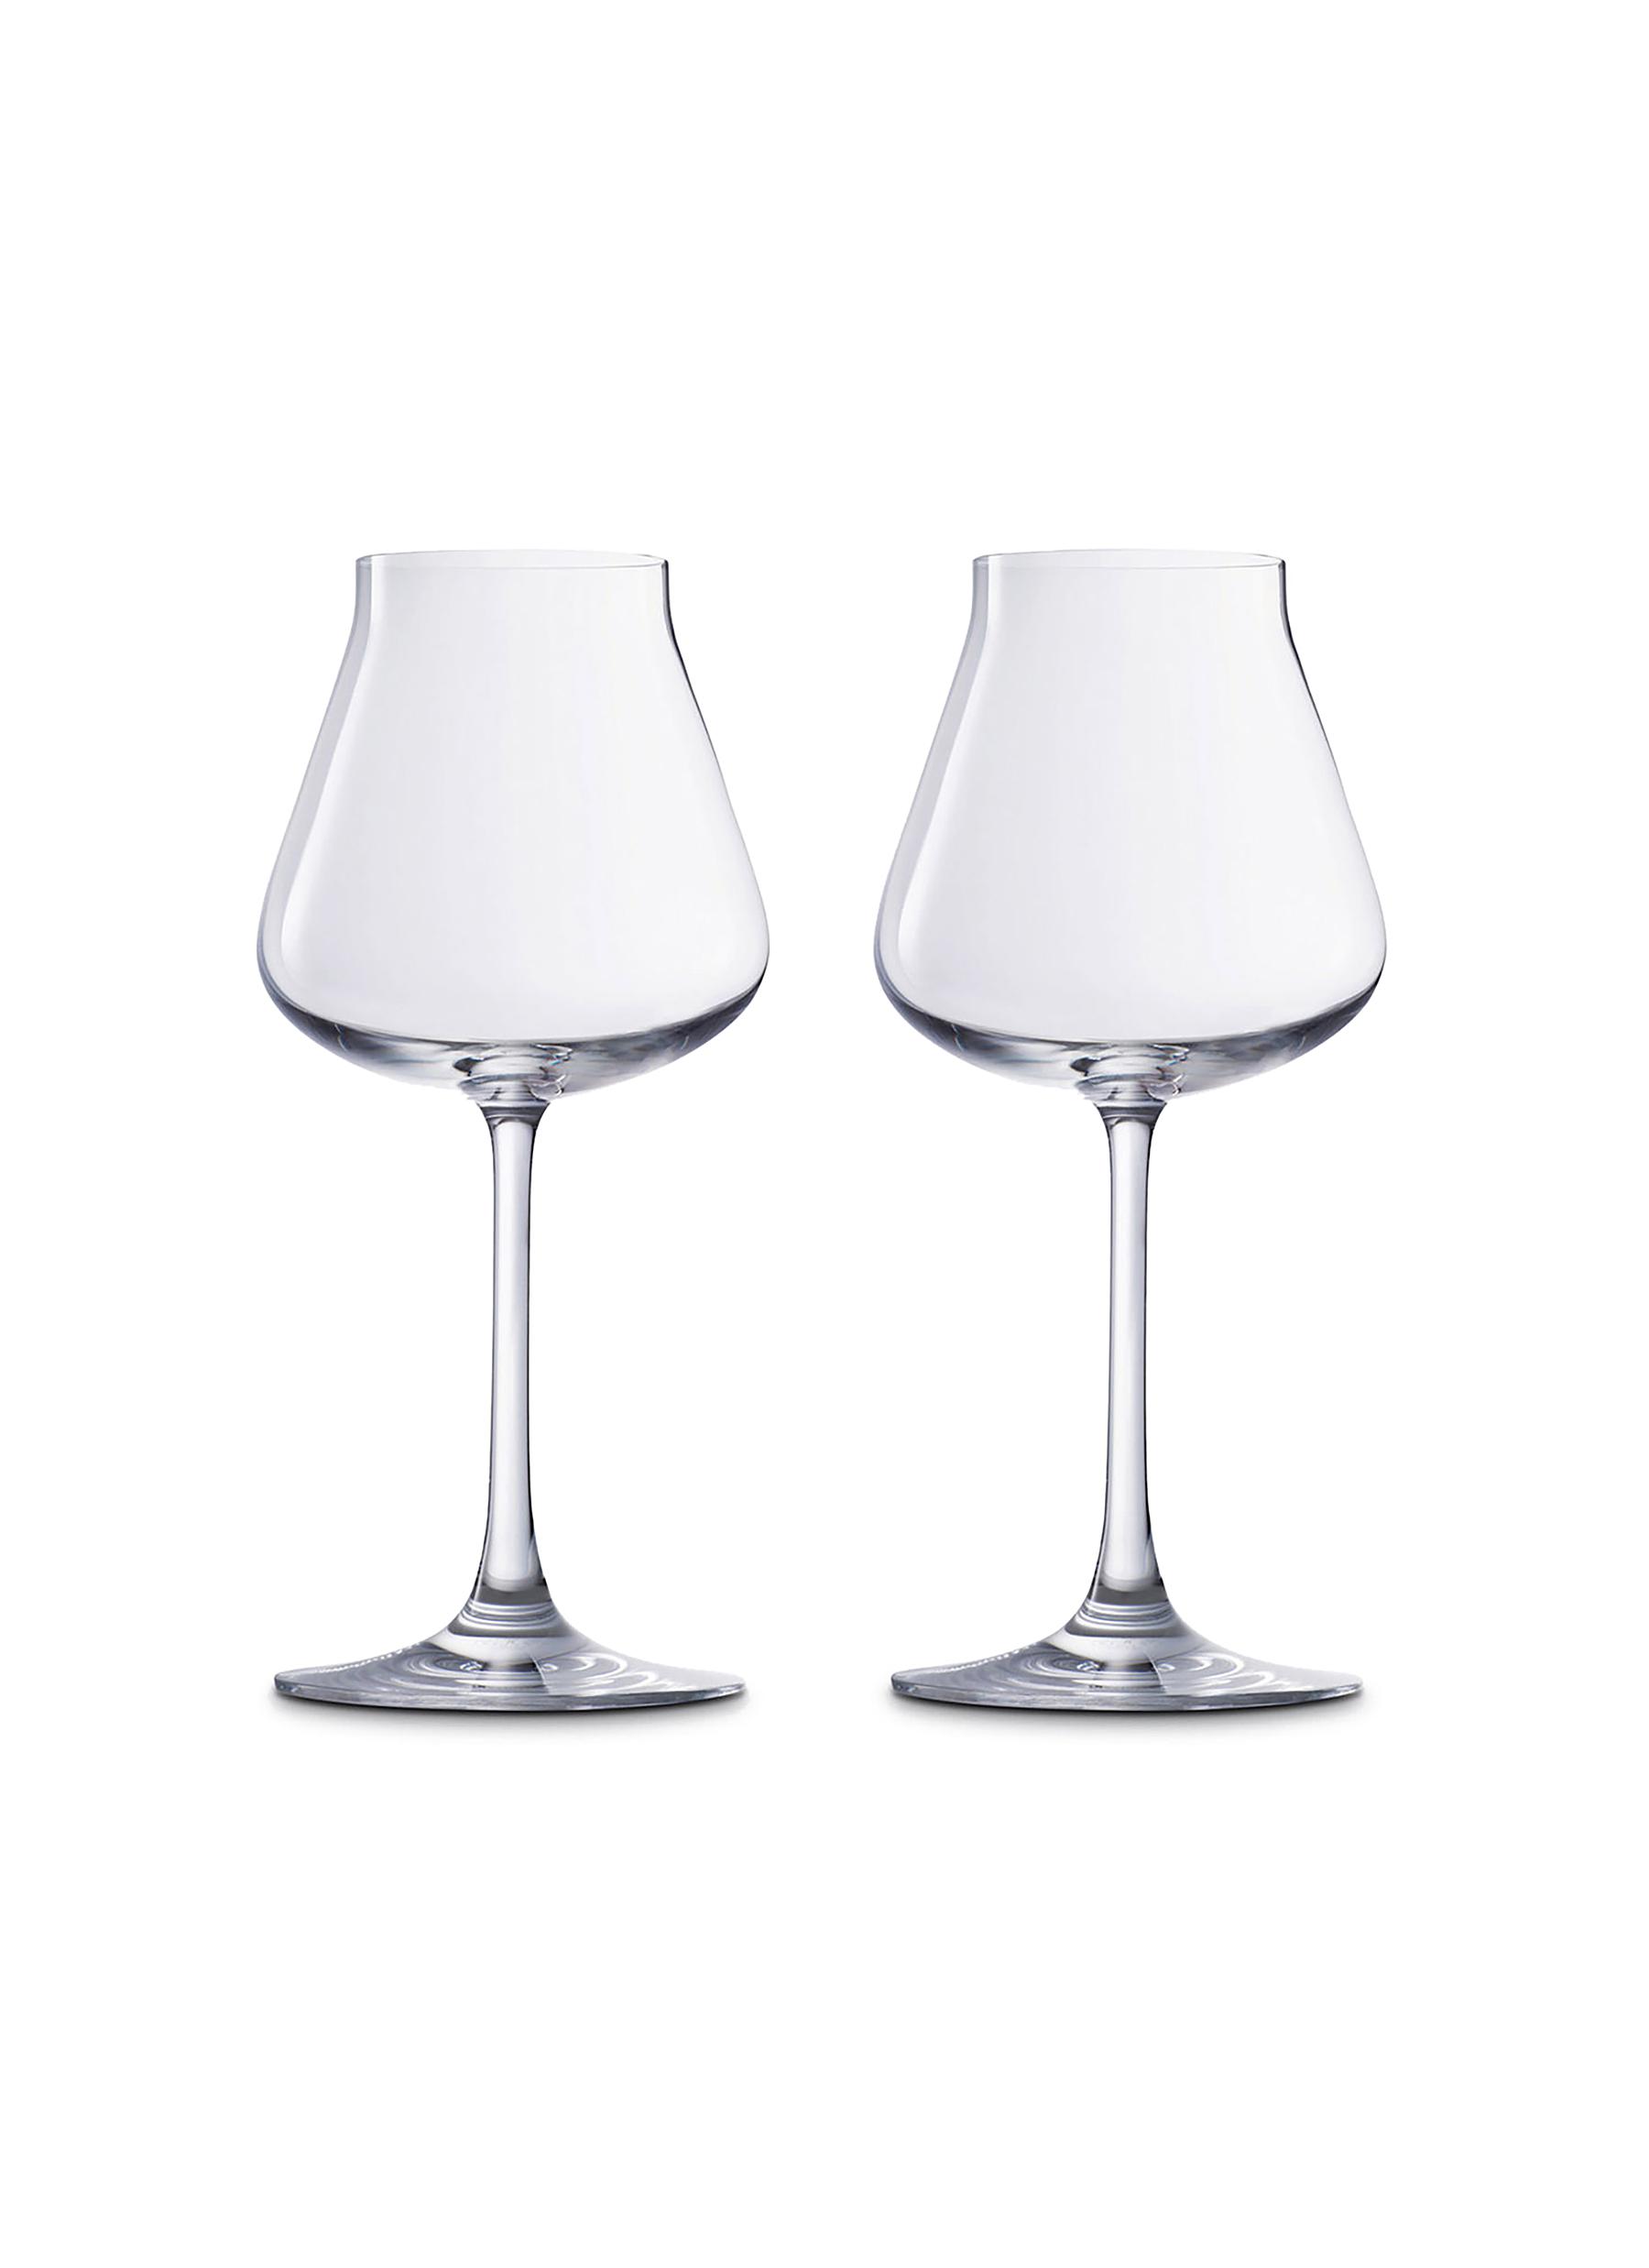 Château Baccarat red wine glass set